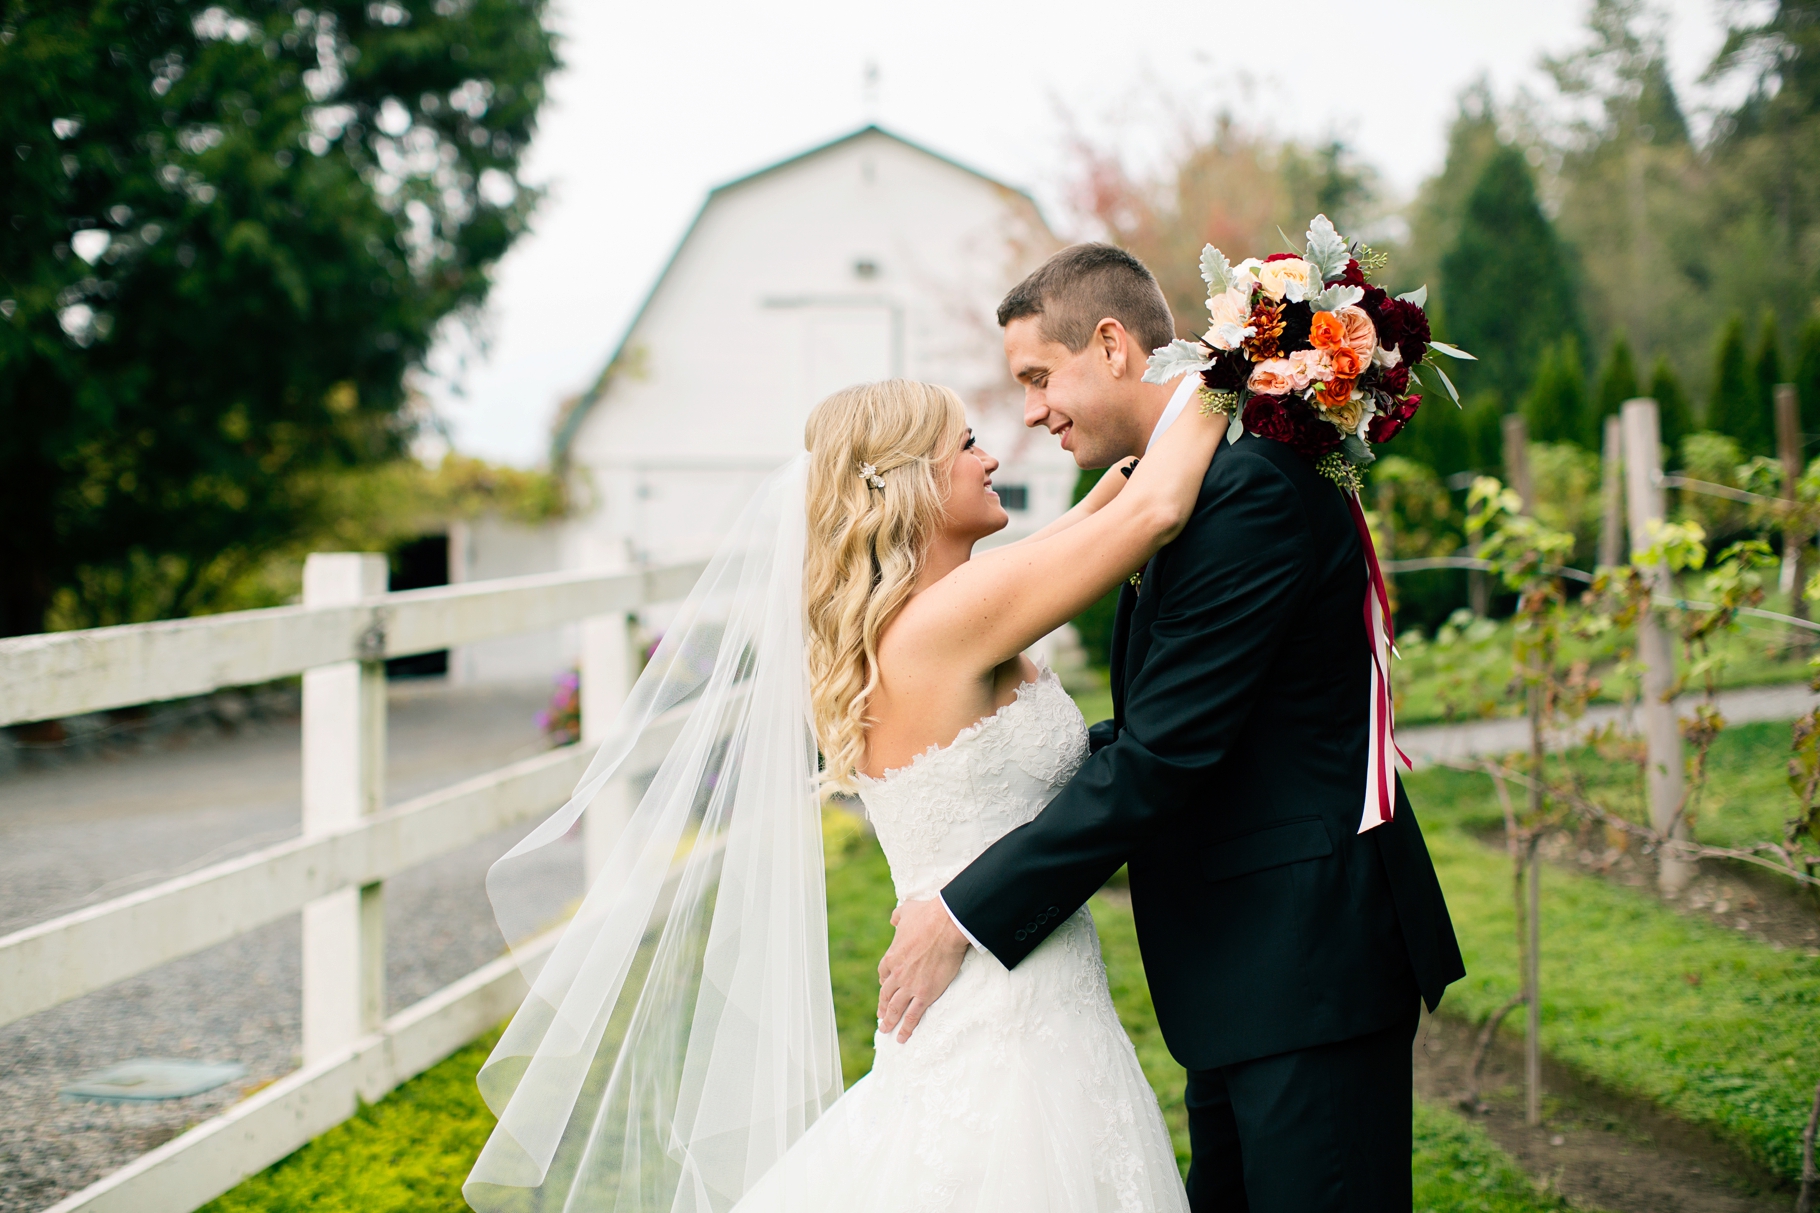 13-Bride-Groom-Portraits-Barn-Delille-Cellars-Chateau-Vineyard-Woodinville-Wedding-Photographer-Photography-by-Betty-Elaine